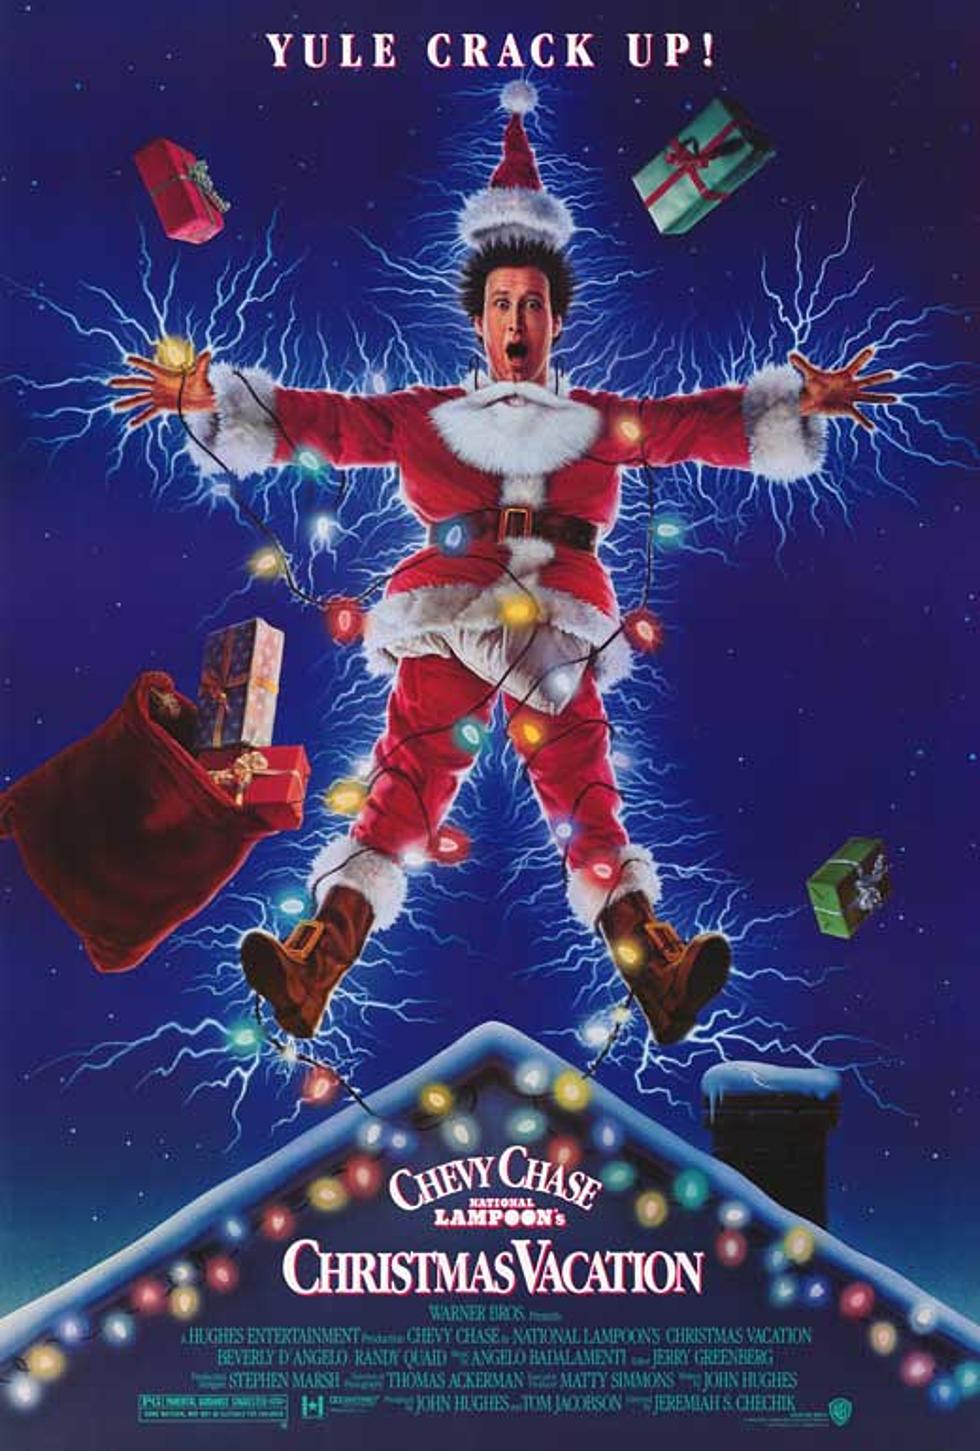 “Christmas Vacation” Pop Up Bar Coming To Chicago